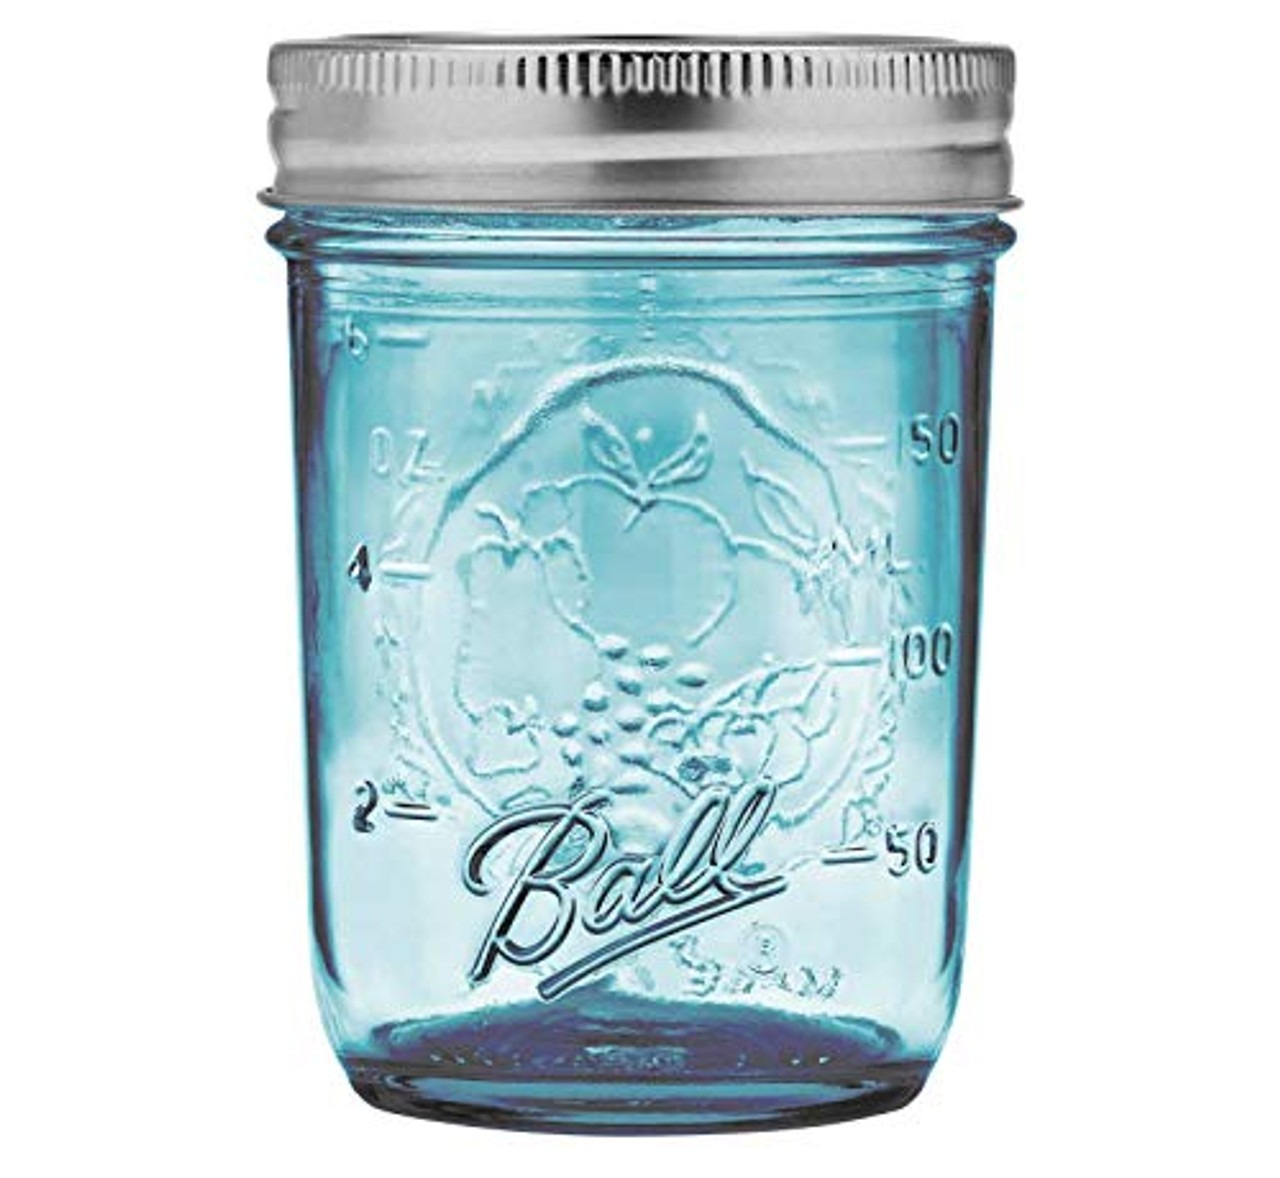 Ball Collection Elite Glass Mason Jar with Lid and Band, Wide Mouth, 8  Ounces, 4 Count 